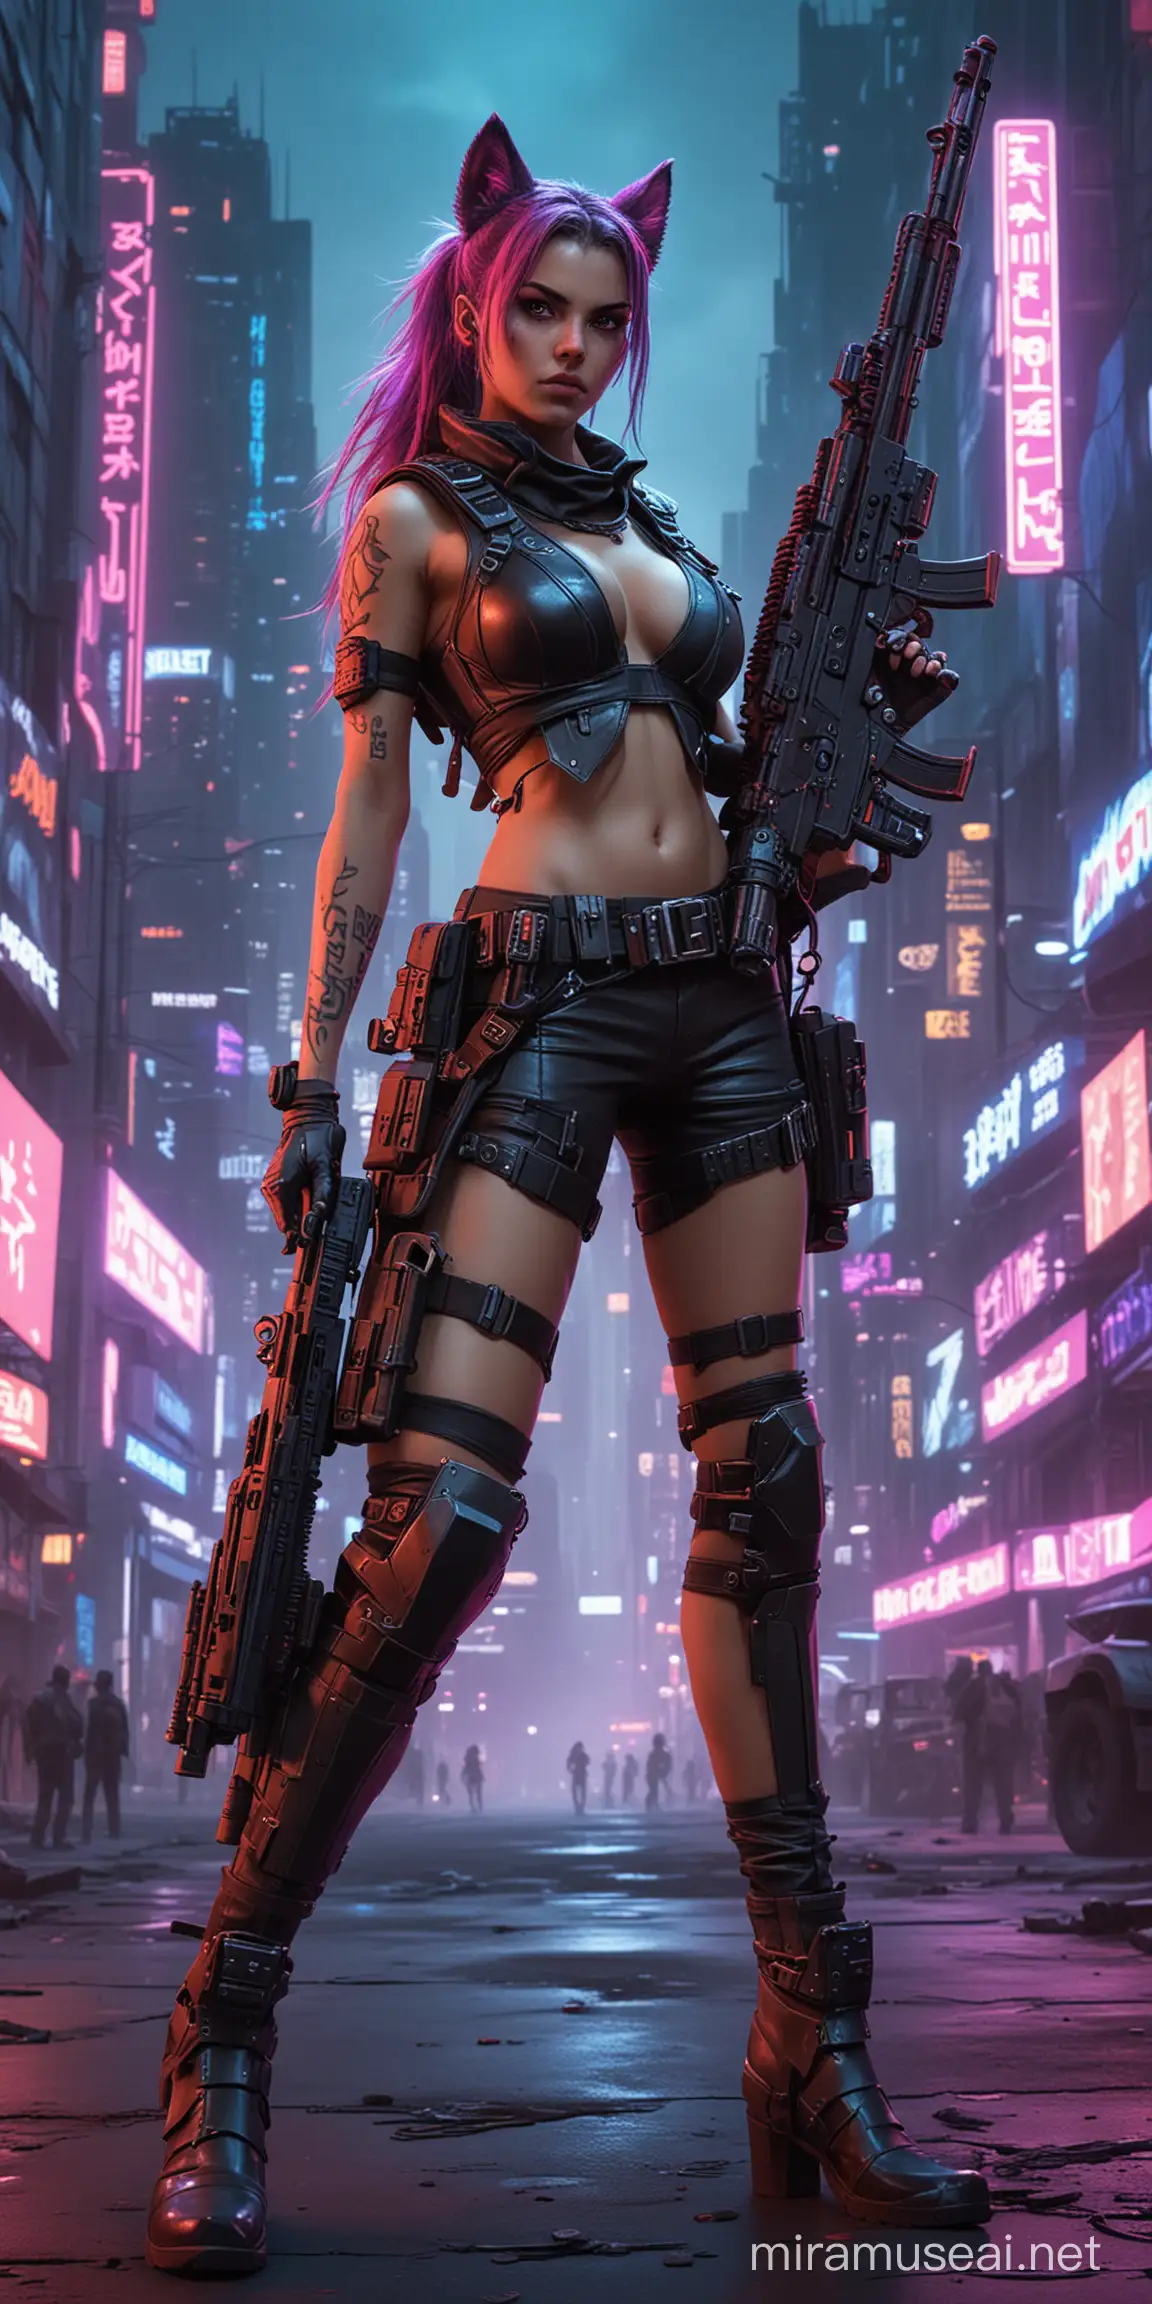 cyberpunk wolfgirl mercenary with a large rifle standing in a neon light city